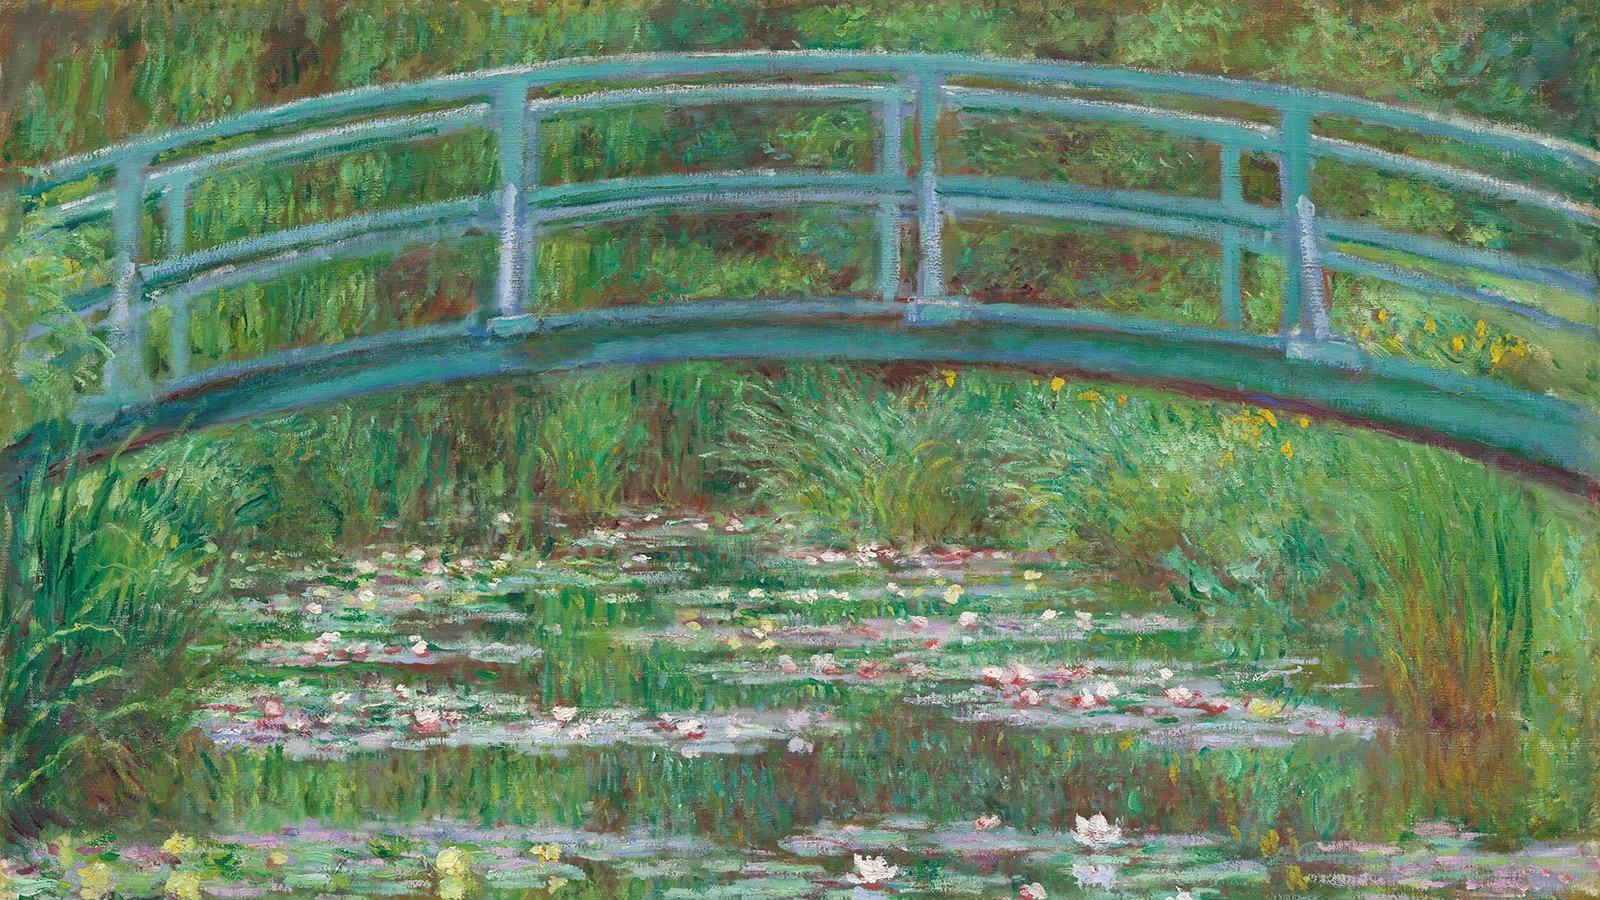 A watercolor painting of a bridge over a pond of lilypads by Claude Monet.